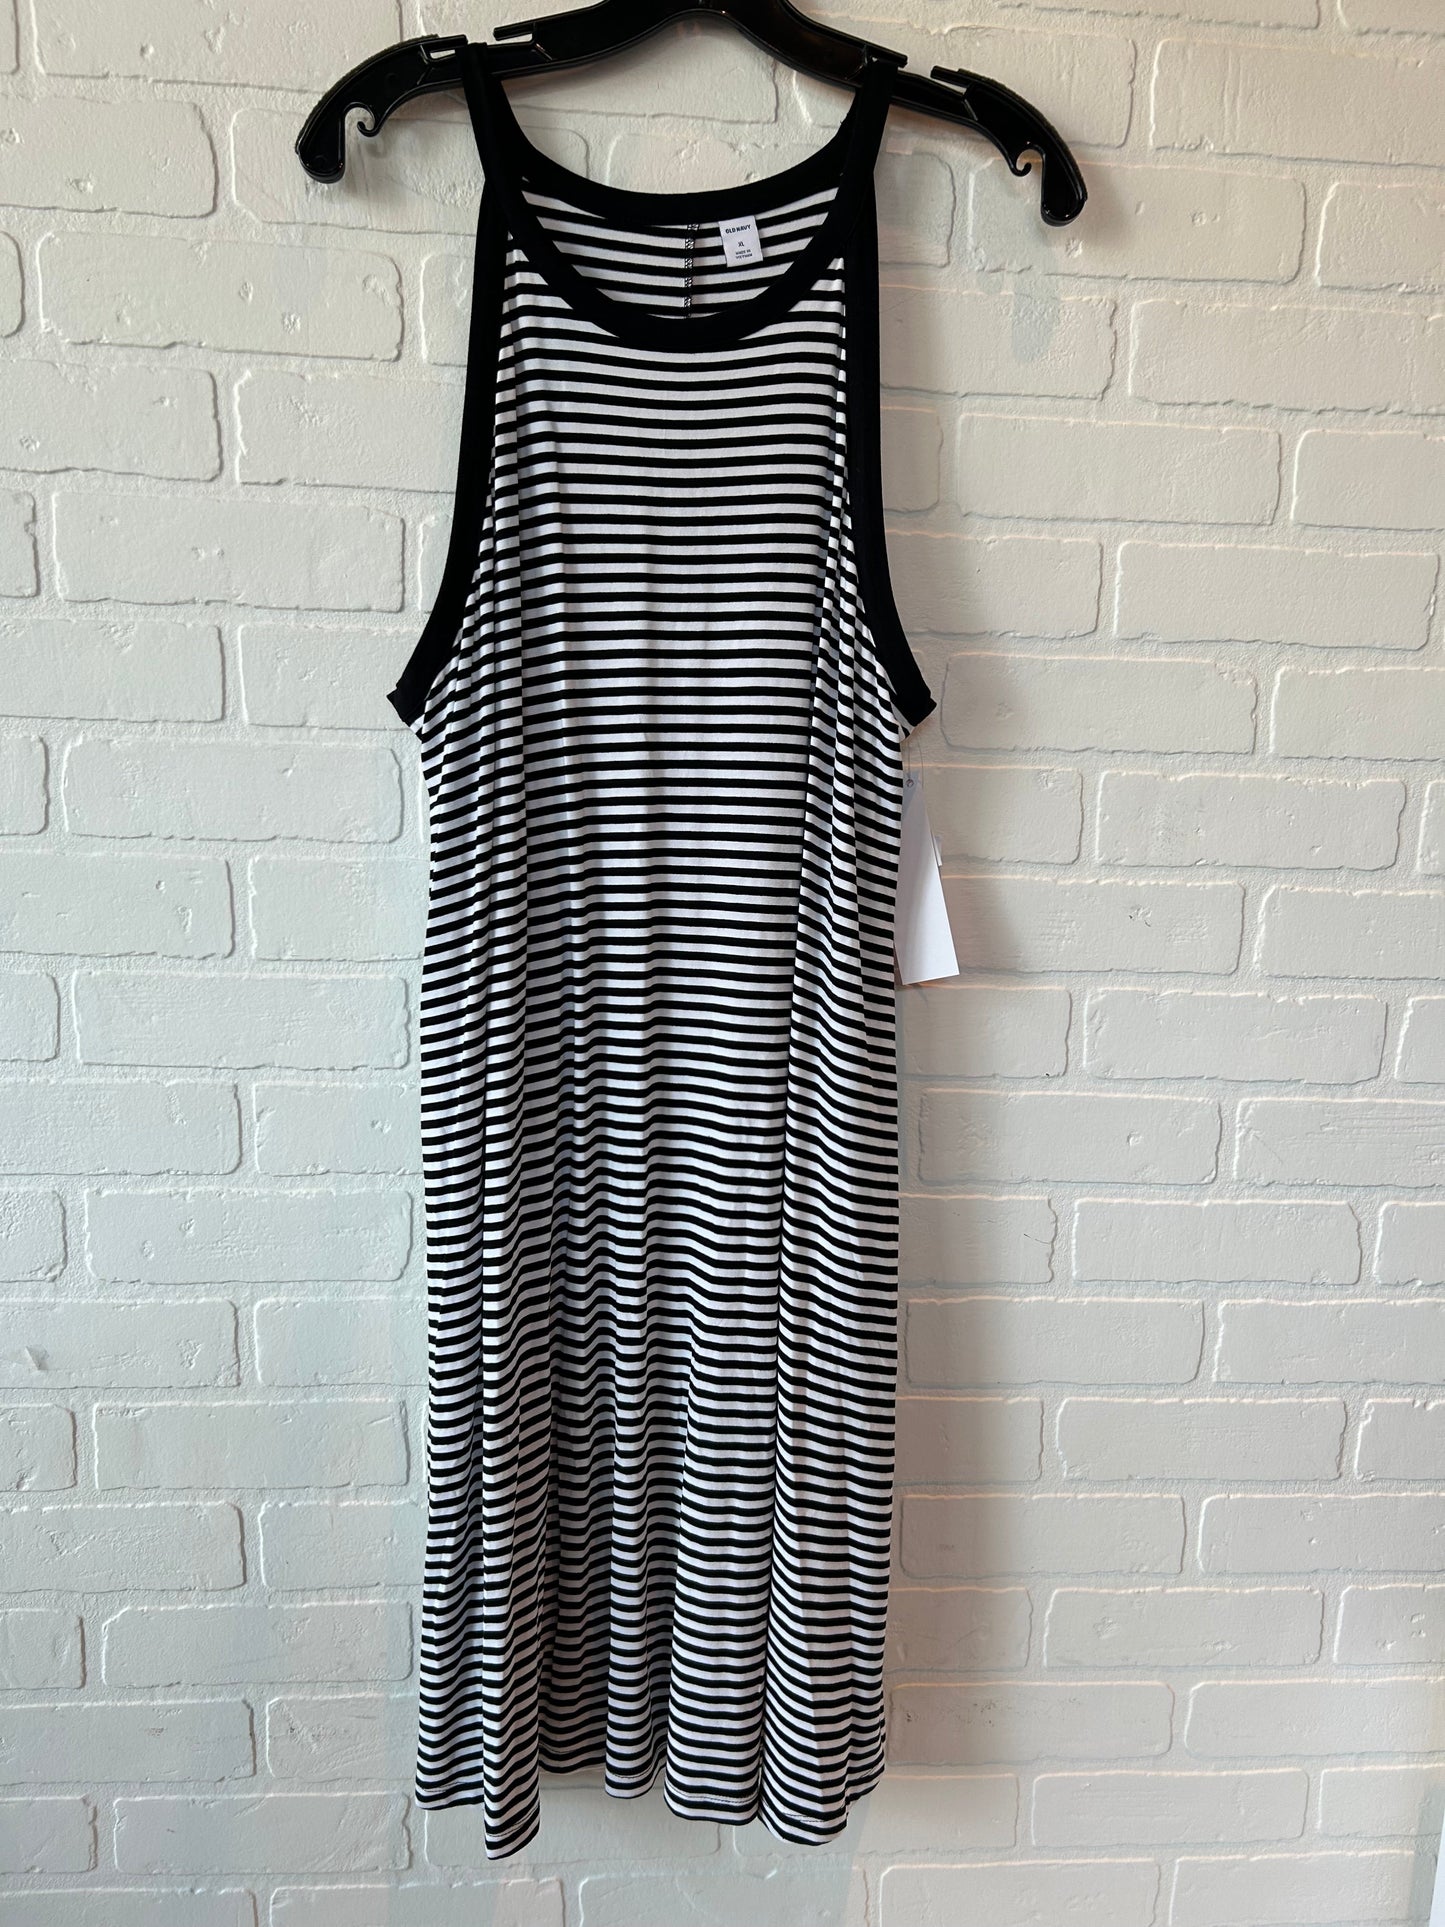 Black & White Dress Casual Short Old Navy, Size Xl